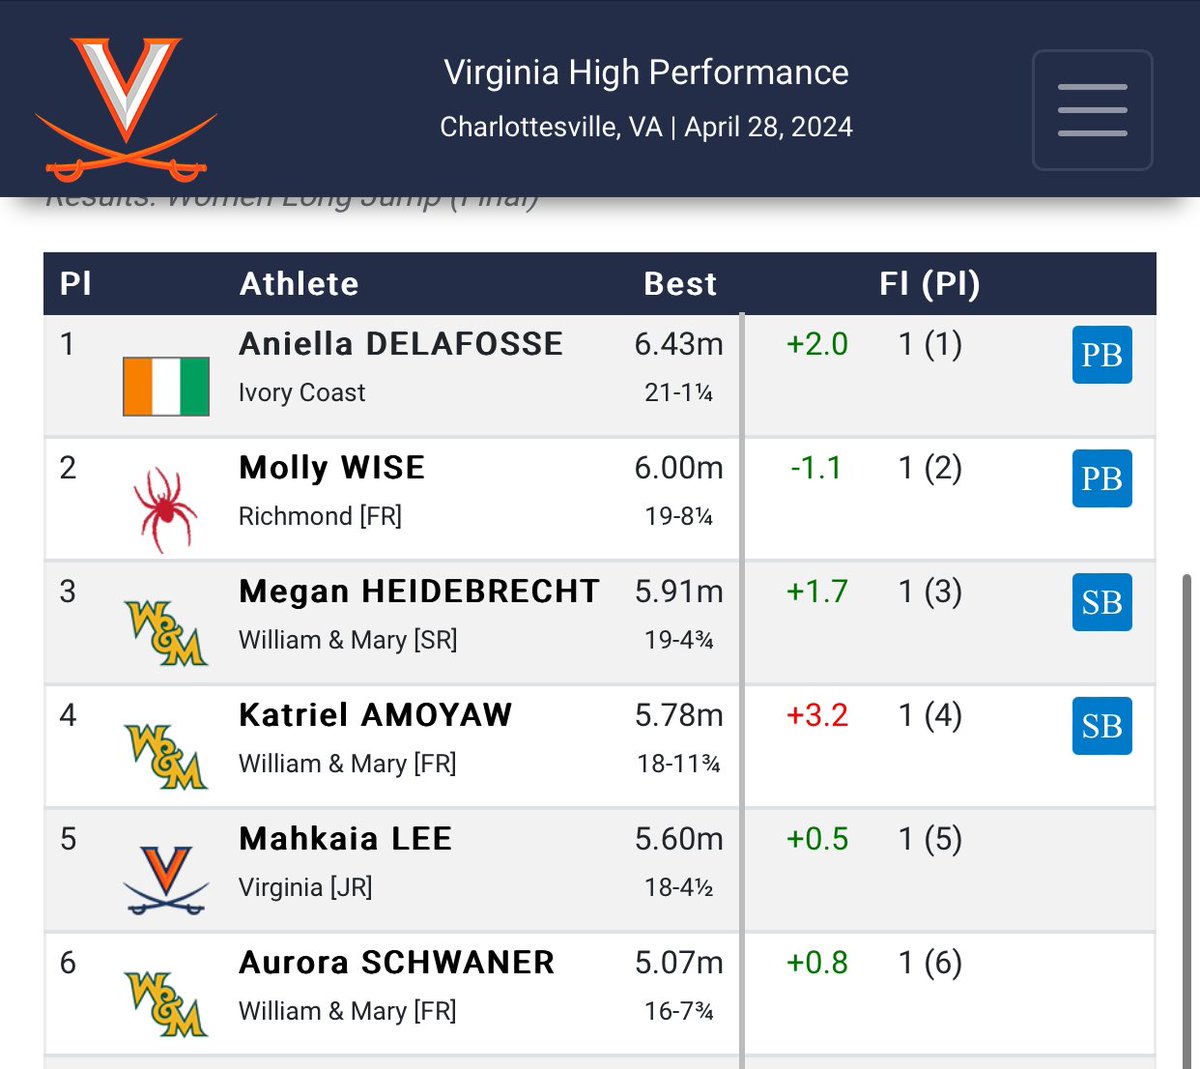 UVA High Performance LJ | Molly Wise is the top collegiate finisher in second overall. Her best jump of 6.00m/19’08.25” is a personal best.